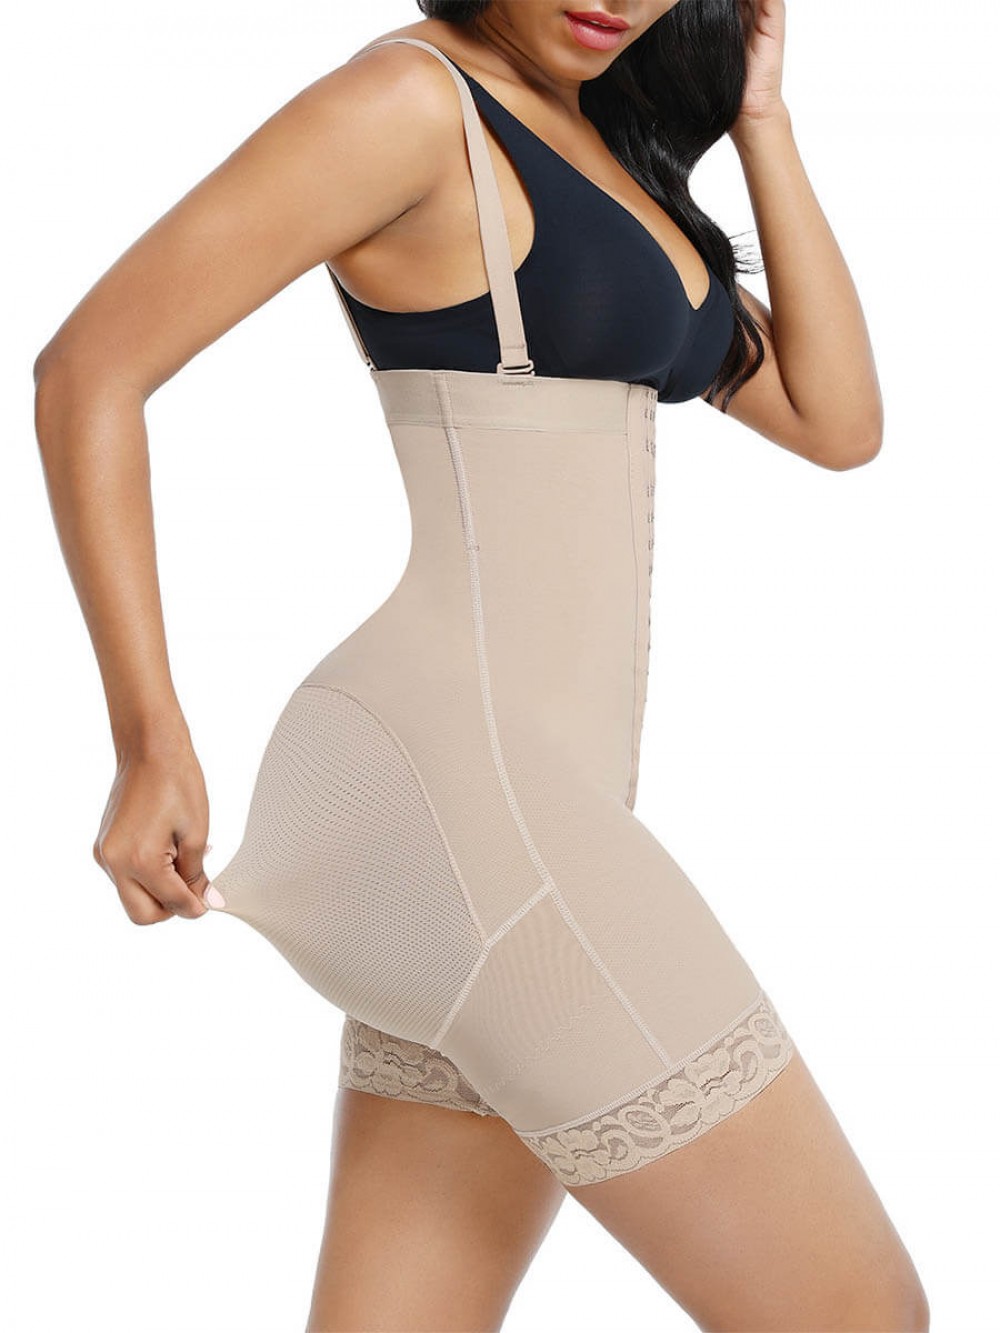 Nude Butt Lifter Slimming Tummy Smoothing Waist With 2 Steel Bones